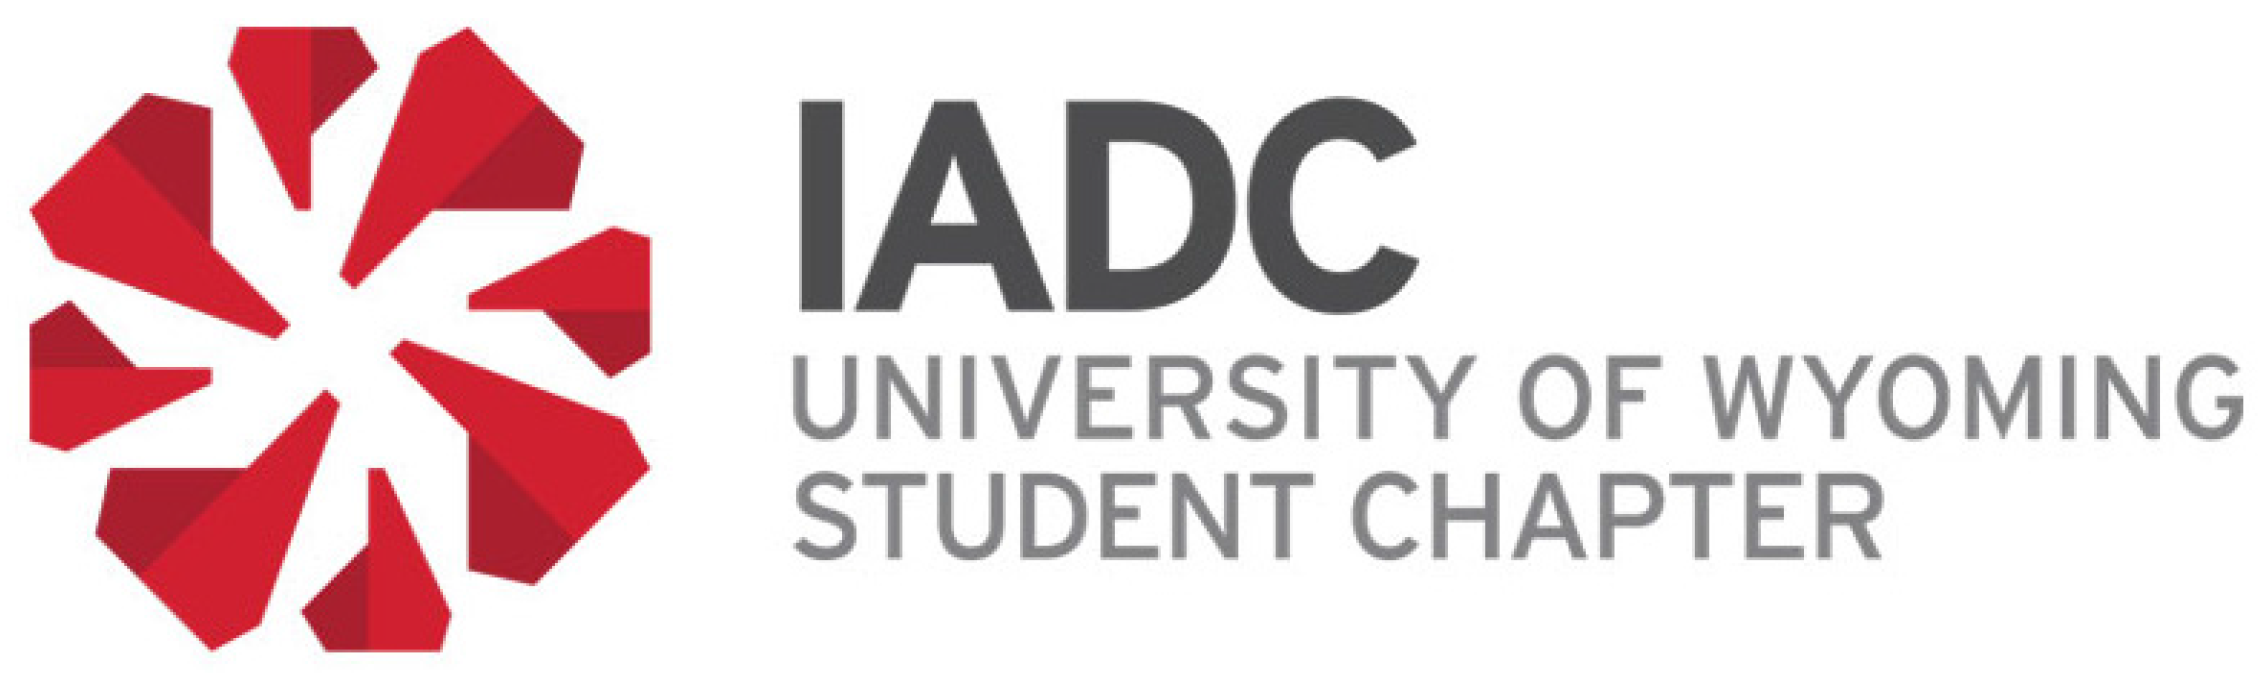 IADC approved logo for student chapter